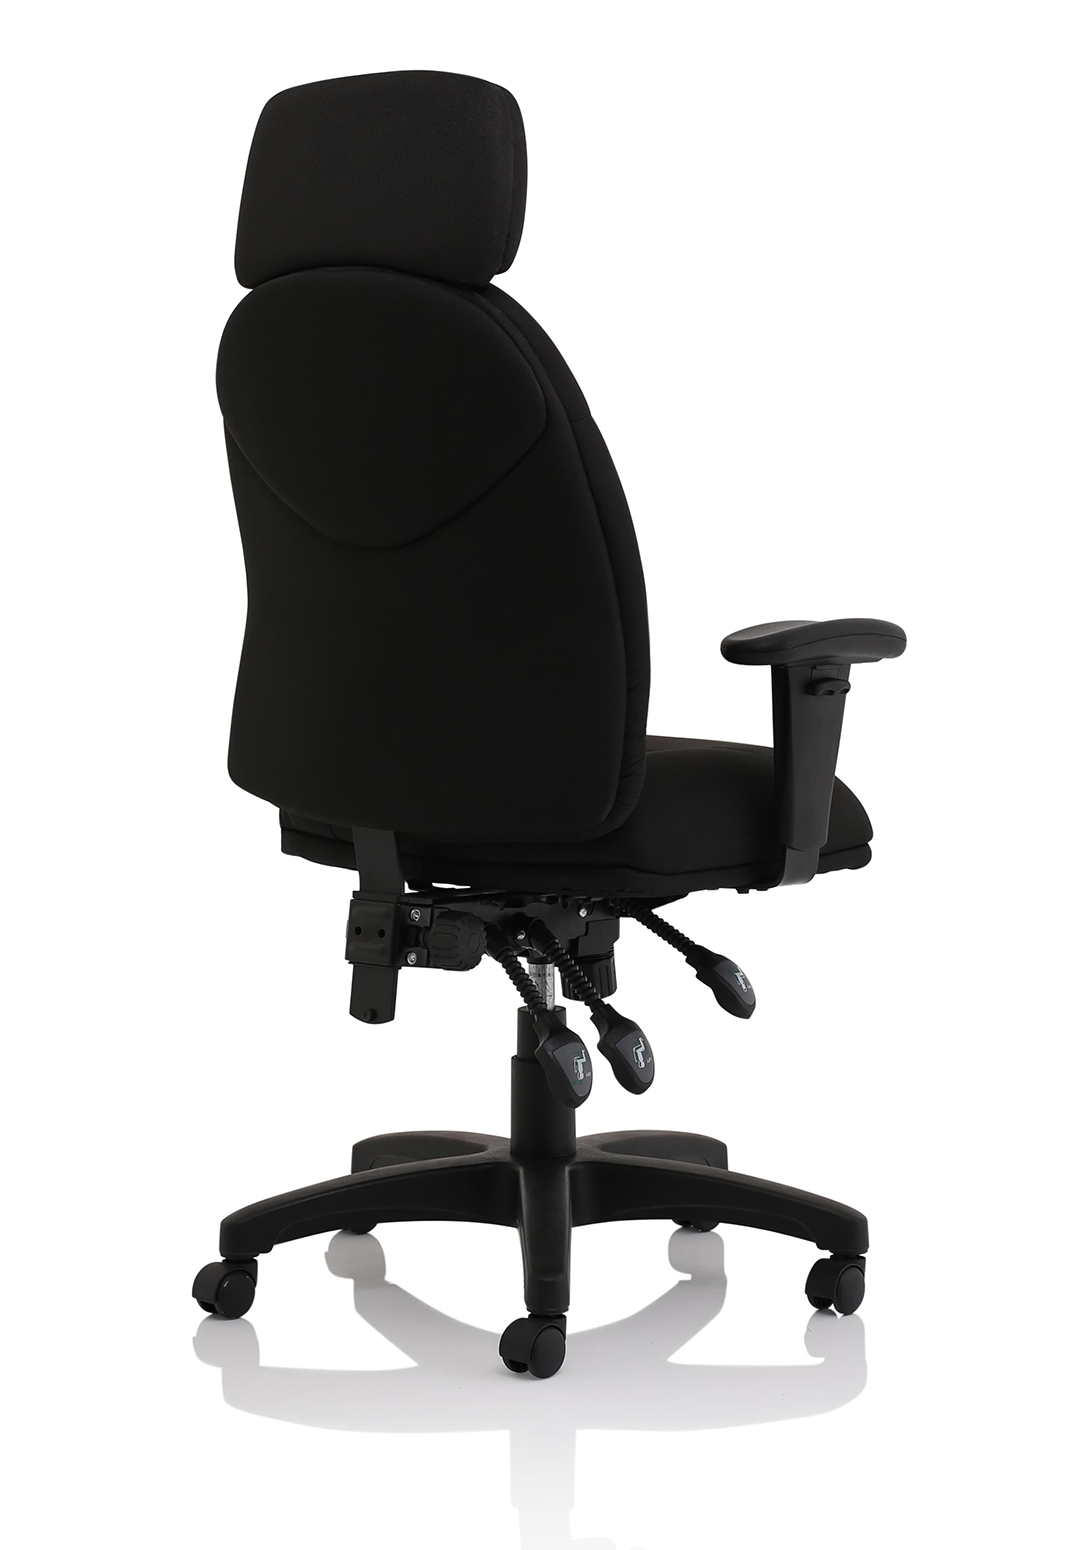 Jet Exec Home Office Chair | Operator Chair | Home Office Furniture | Task Chair | Task Operator Chair | Ergonomic Office Chair | Home Office Chair